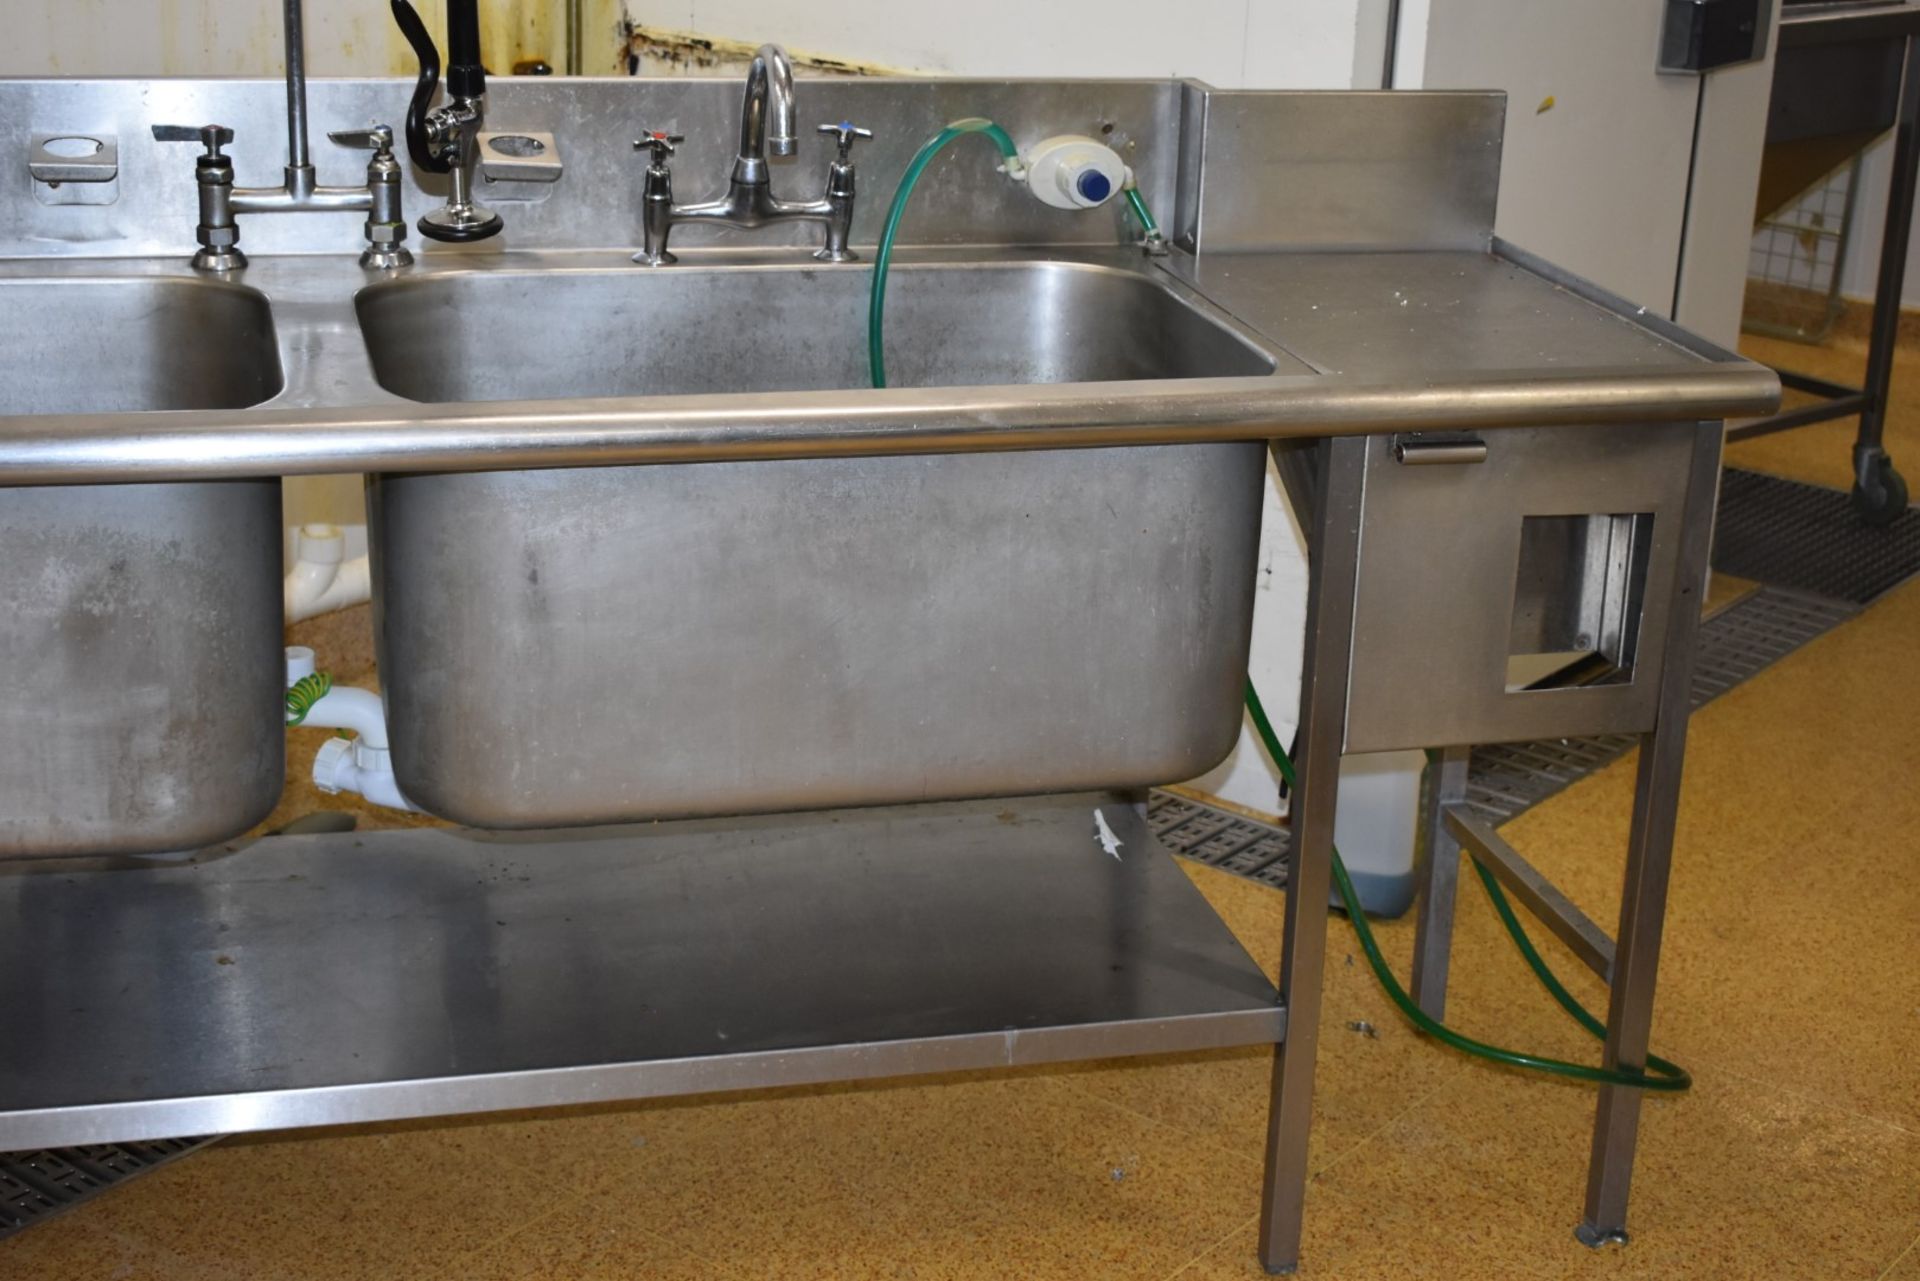 1 x Large Stainless Steel Wash Unit With Twin Deep Sink Basins, Hose Rinser Tap, Mixer Taps, - Image 8 of 10